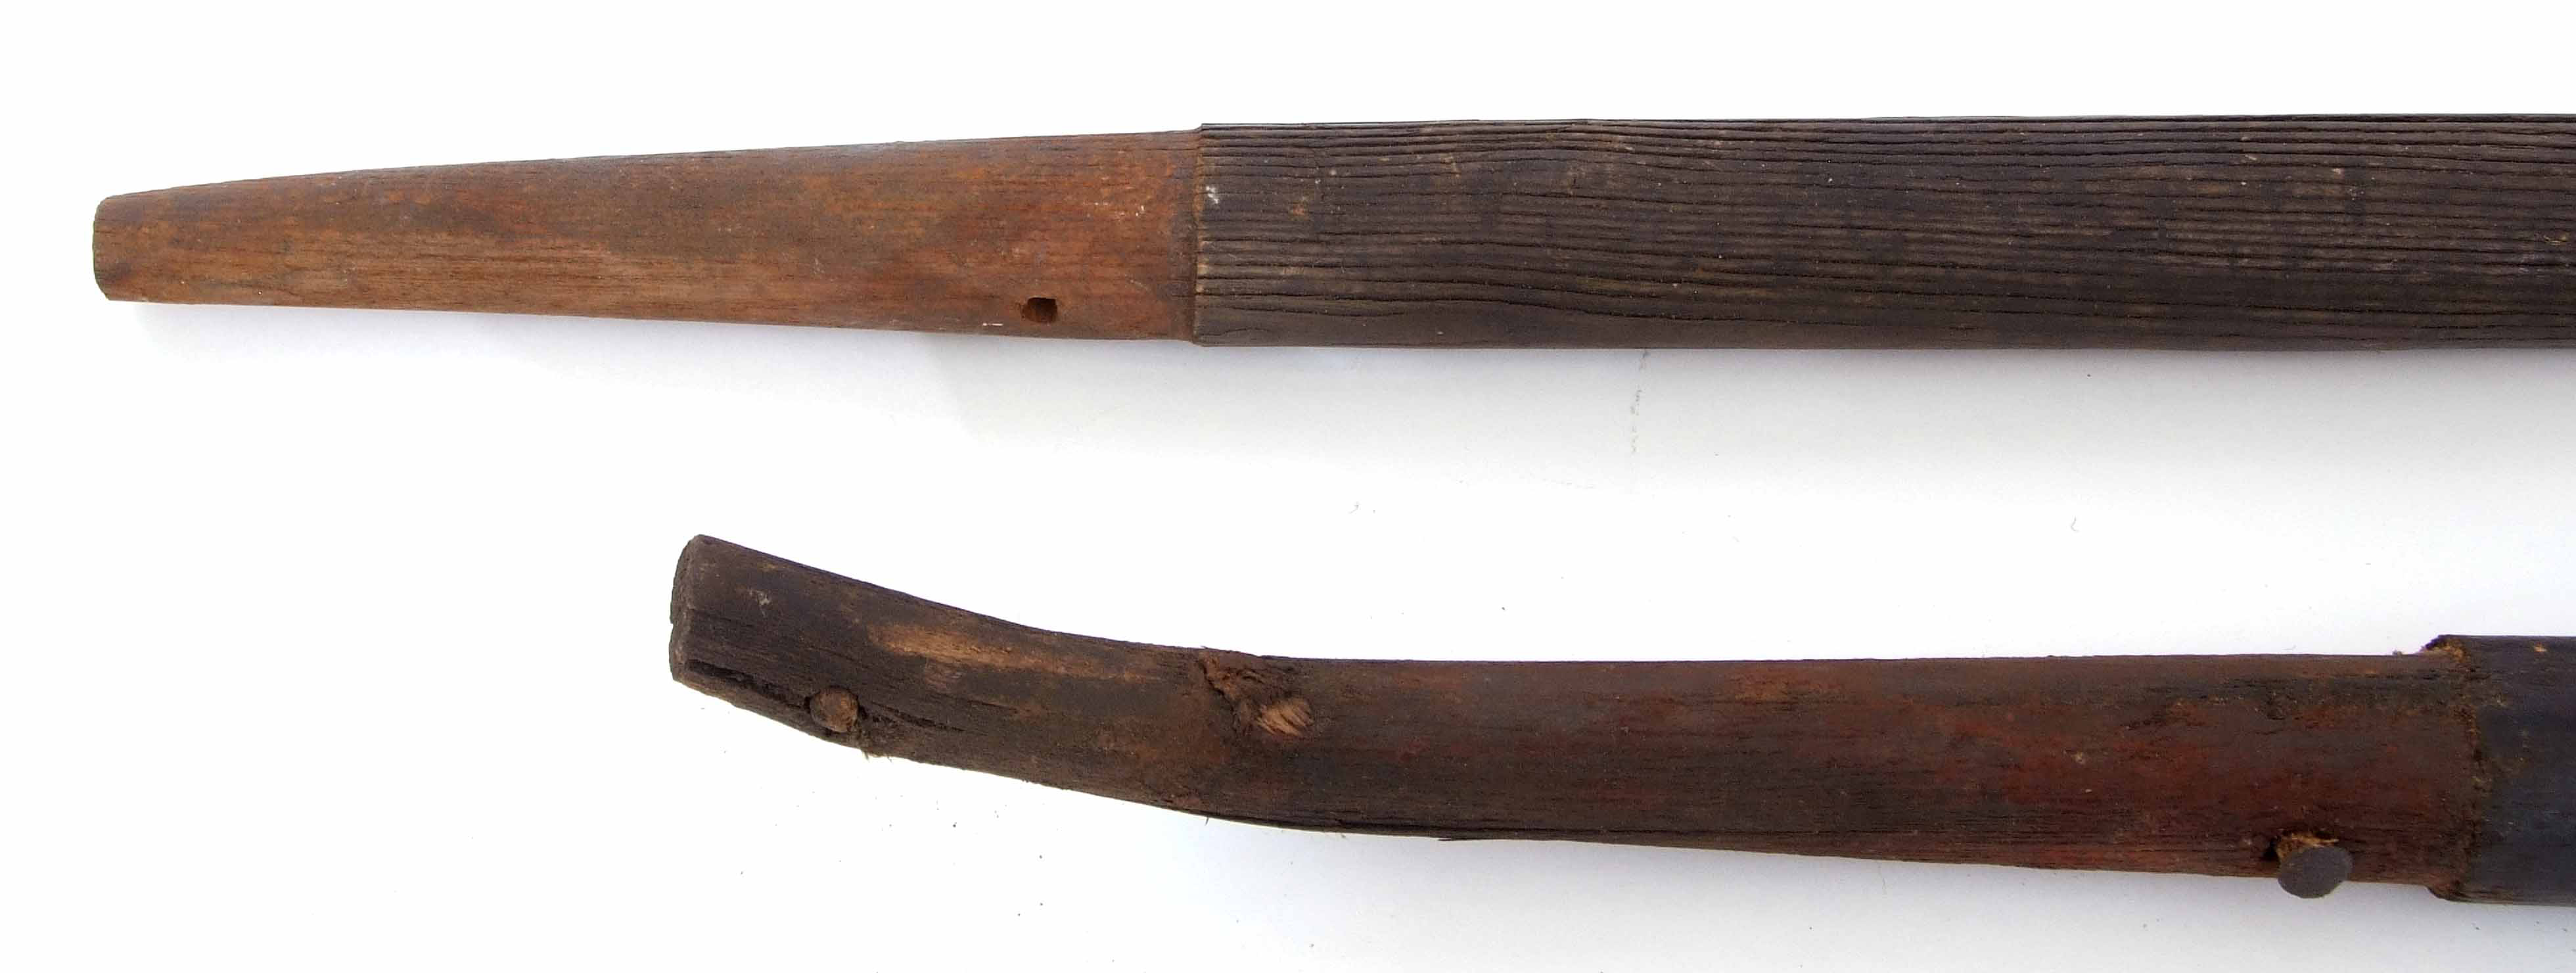 Railway Tools: Two 60 cm wooden shovel handles blackened through use but with no railway markings - Image 5 of 5